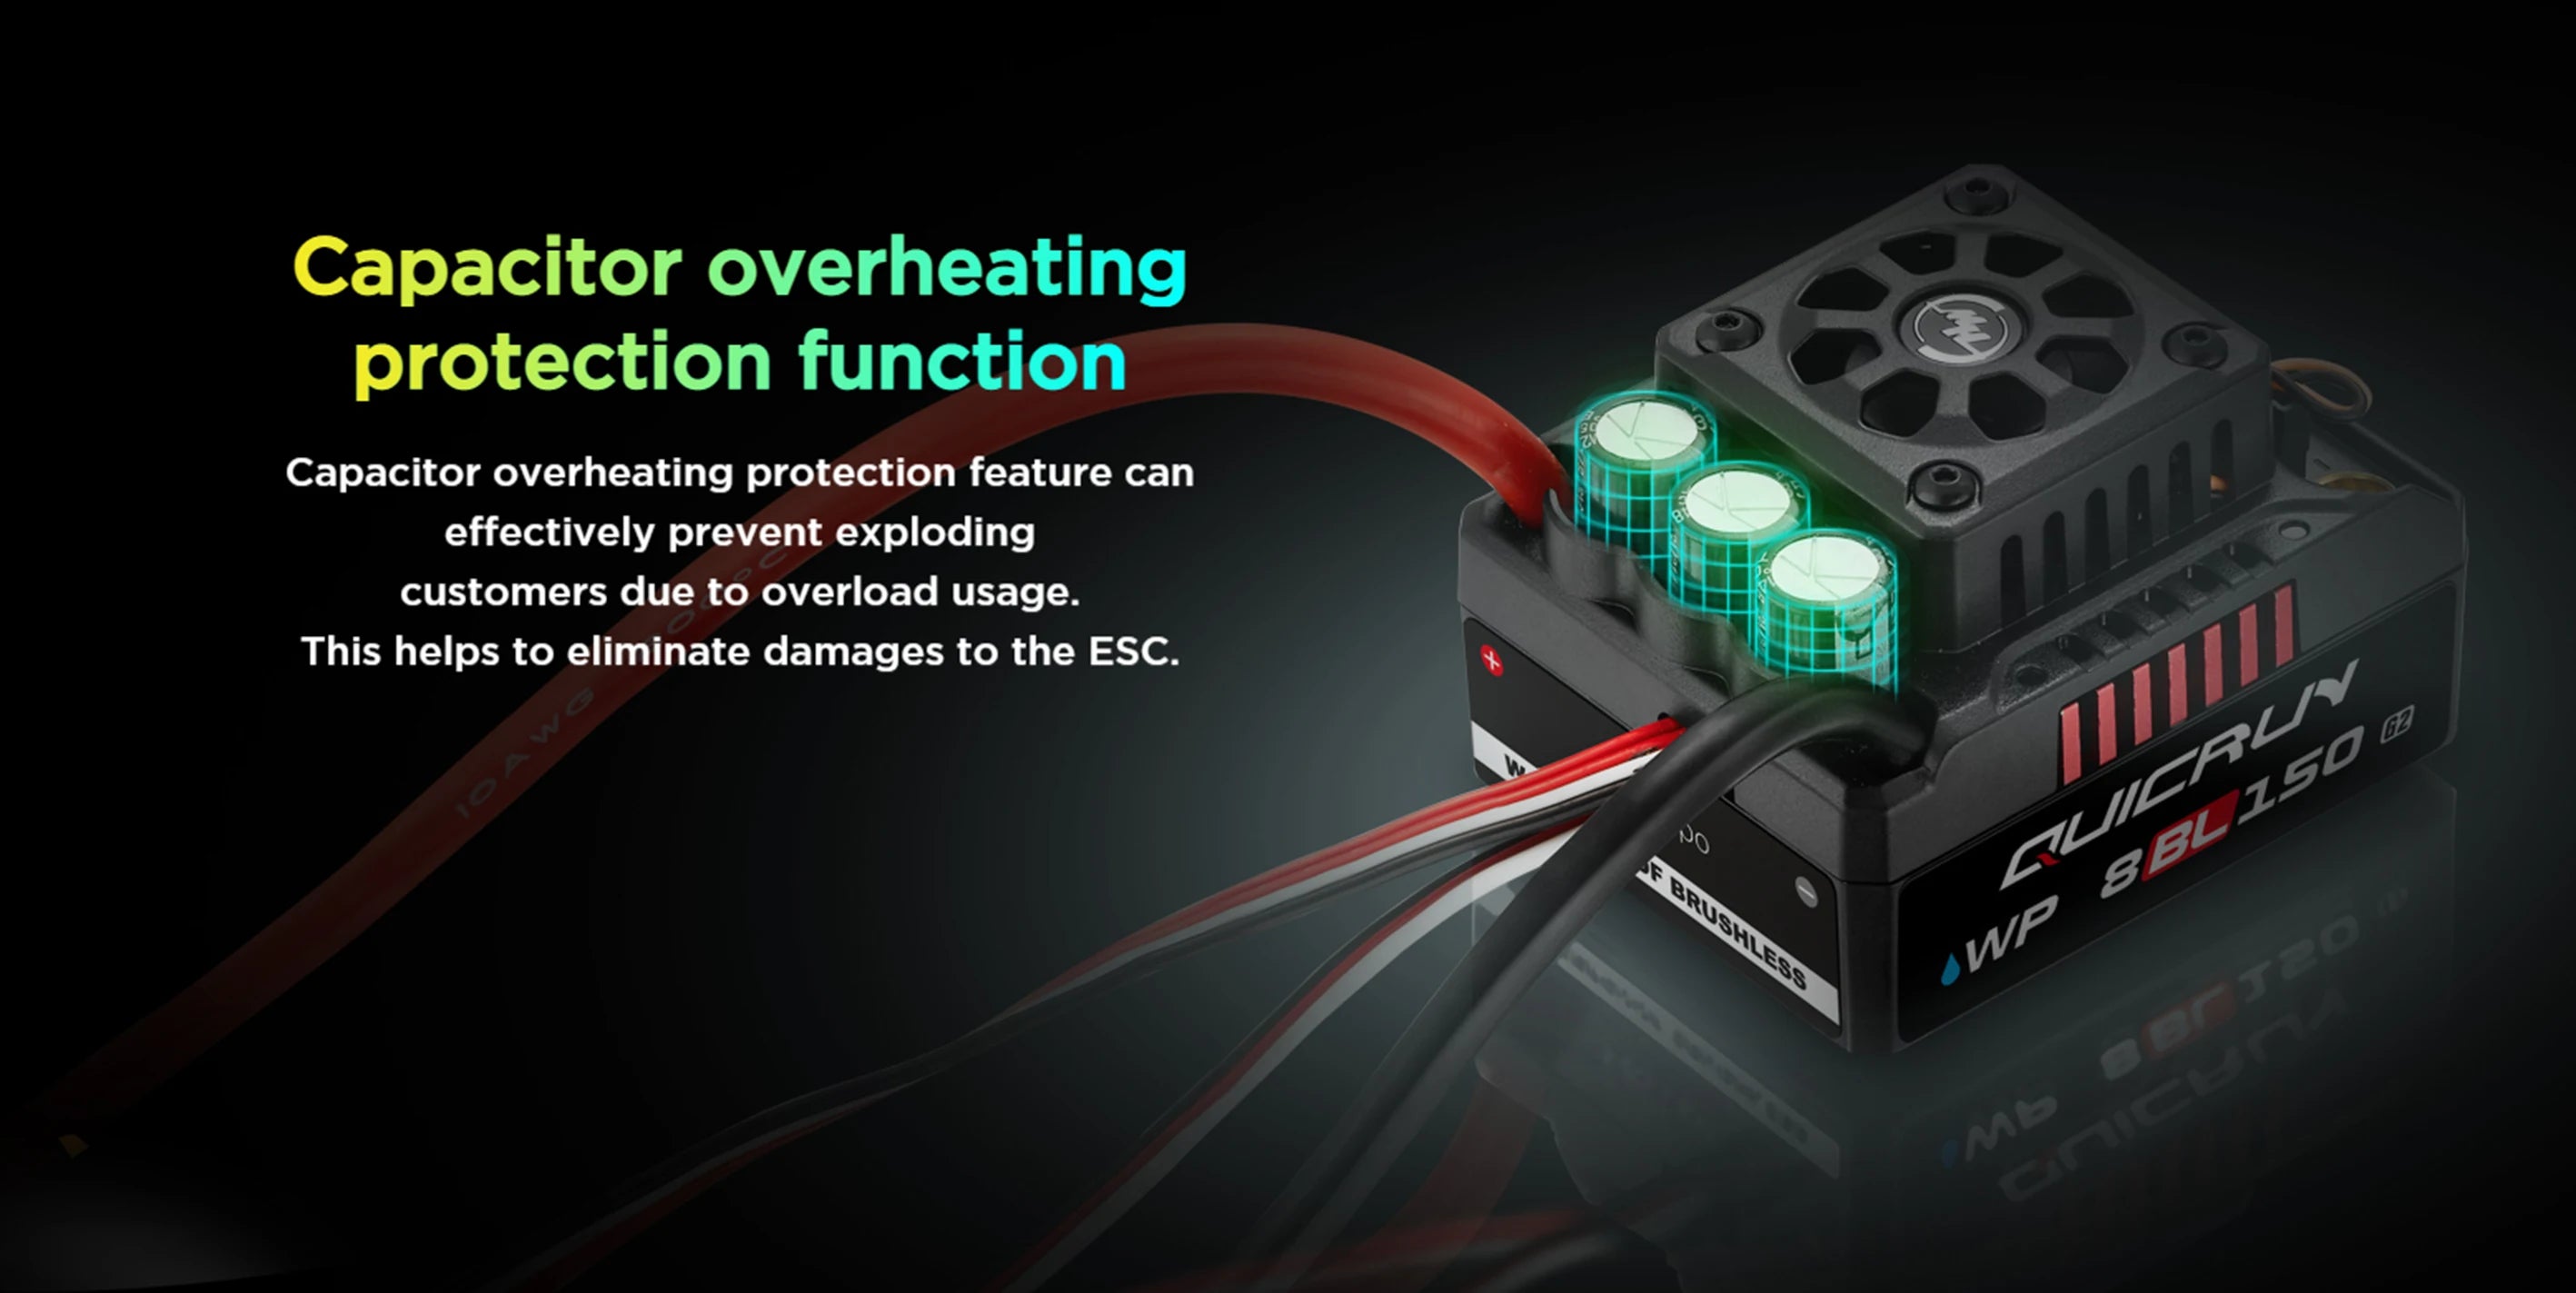 Capacitor overheating protection function can effectively prevent exploding customers due to